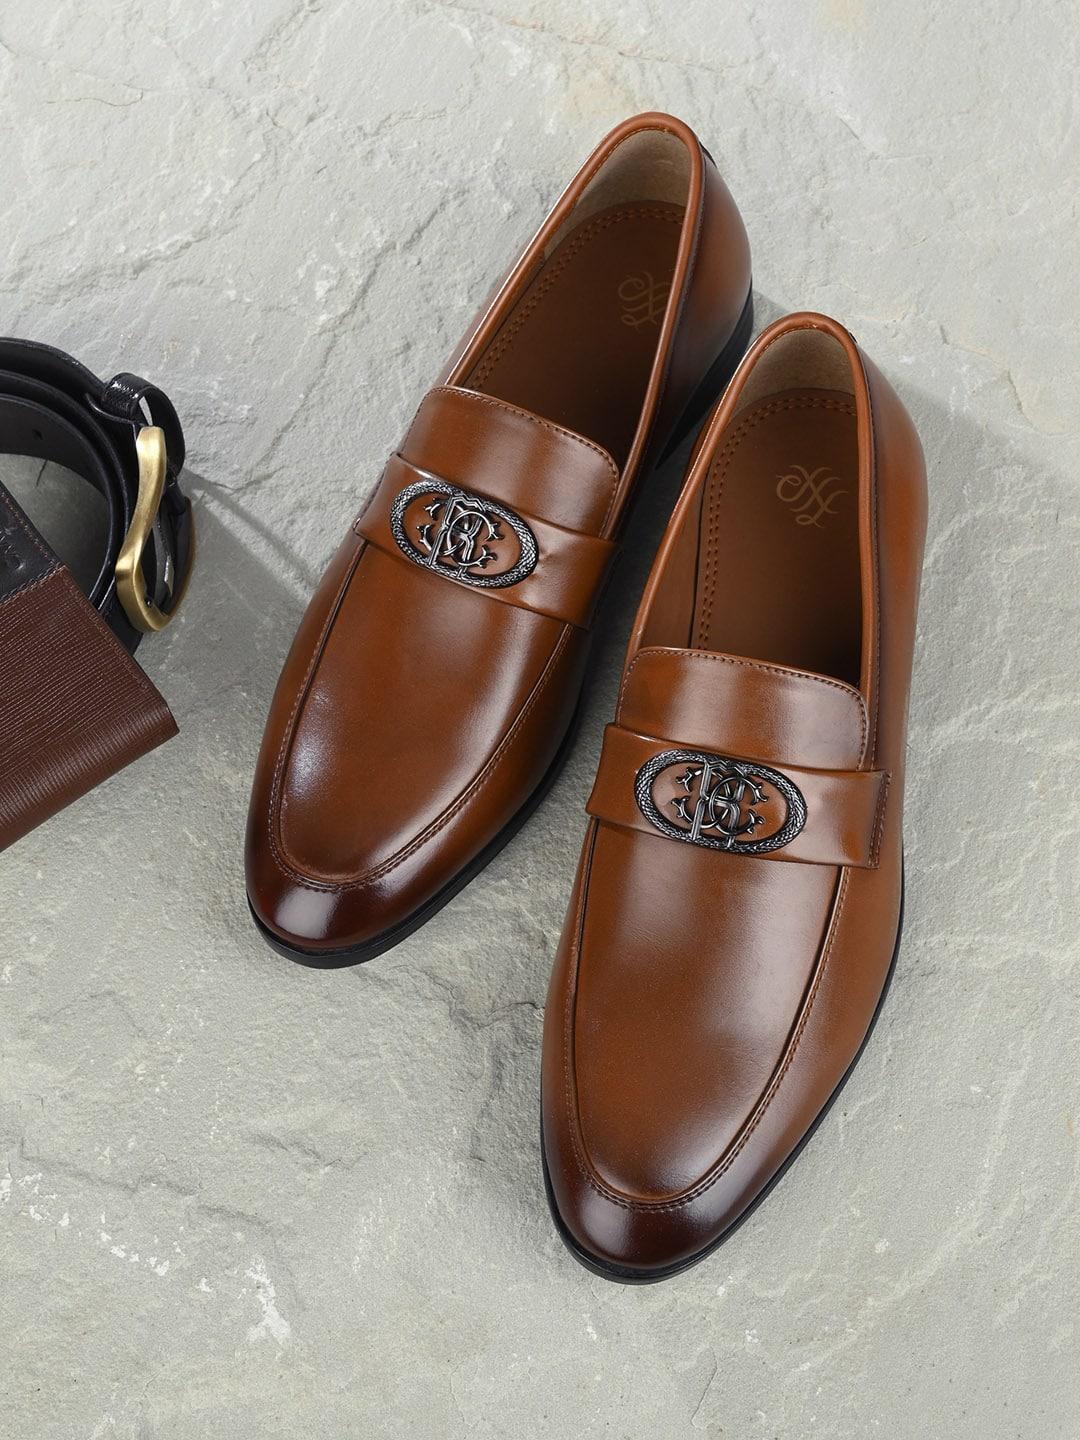 house of pataudi men formal loafer shoes